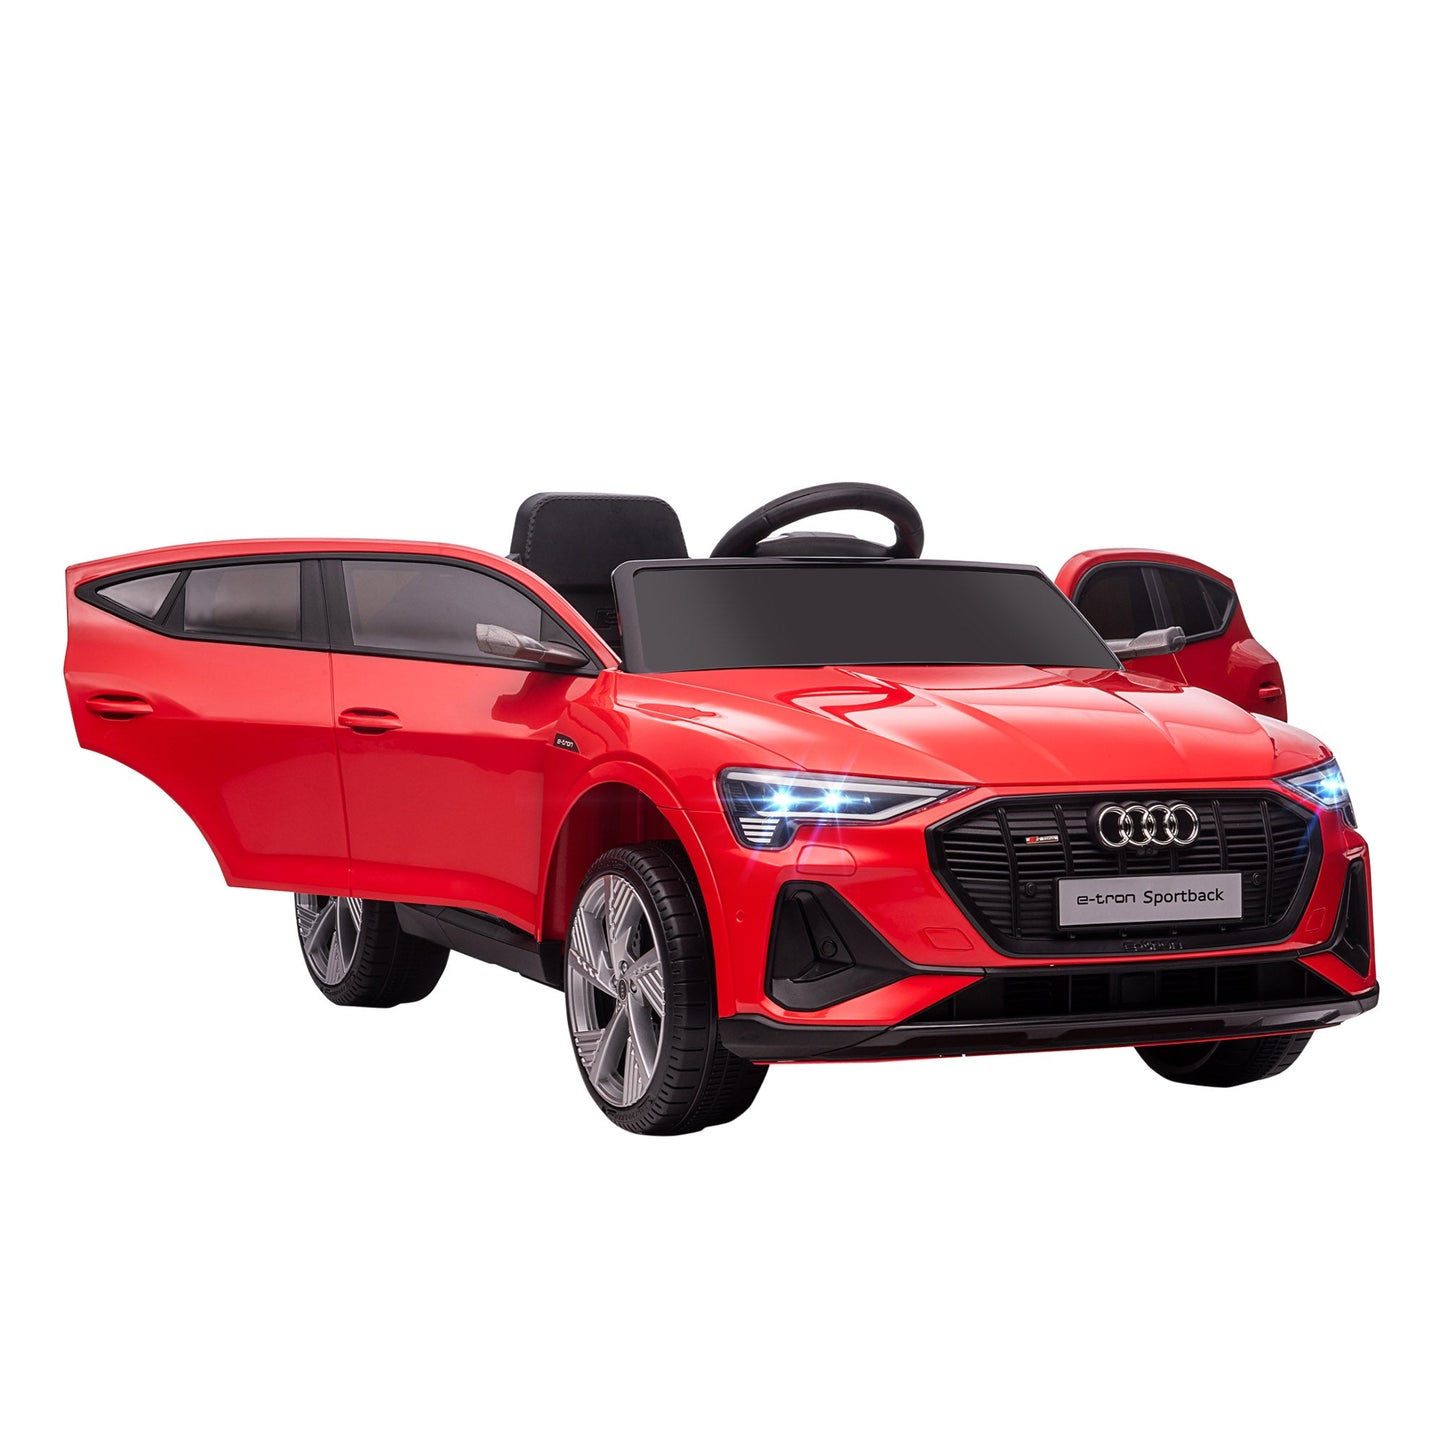 Toys and Games-12V Kids Electric Ride On Audi Sports Car, Battery Powered Toy w/ Remote Control, Safety Belt, LED Lights, Music & Horn for Children, Red - Outdoor Style Company